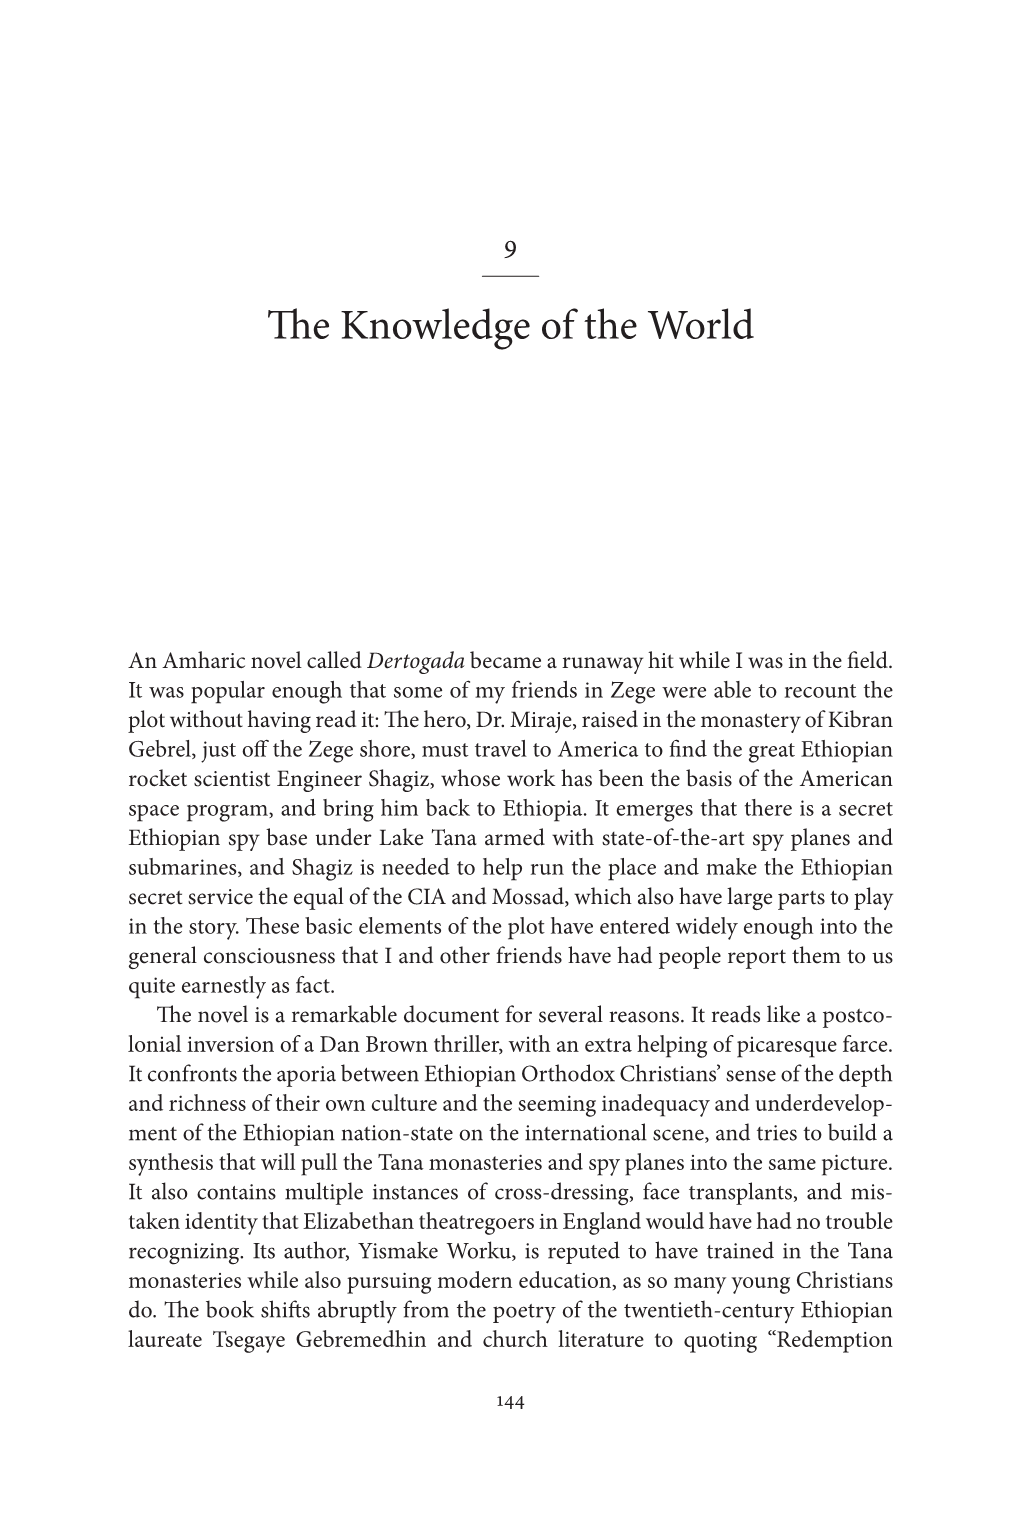 The Knowledge of the World